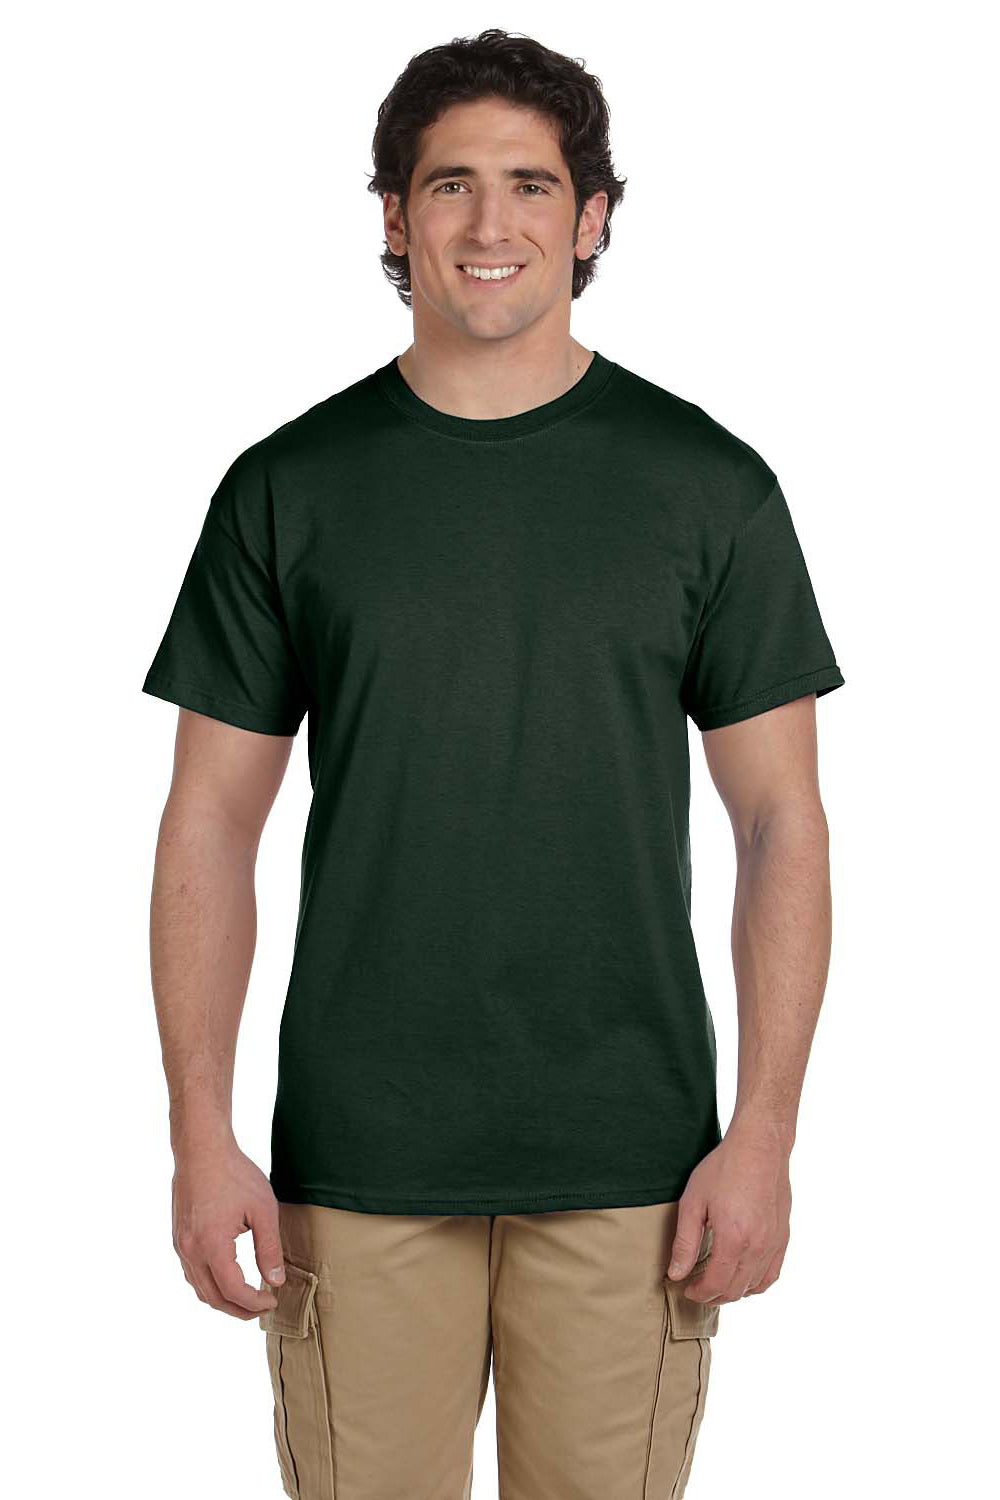 Fruit Of The Loom 3931 Mens HD Jersey Short Sleeve Crewneck T-Shirt Forest Green Front